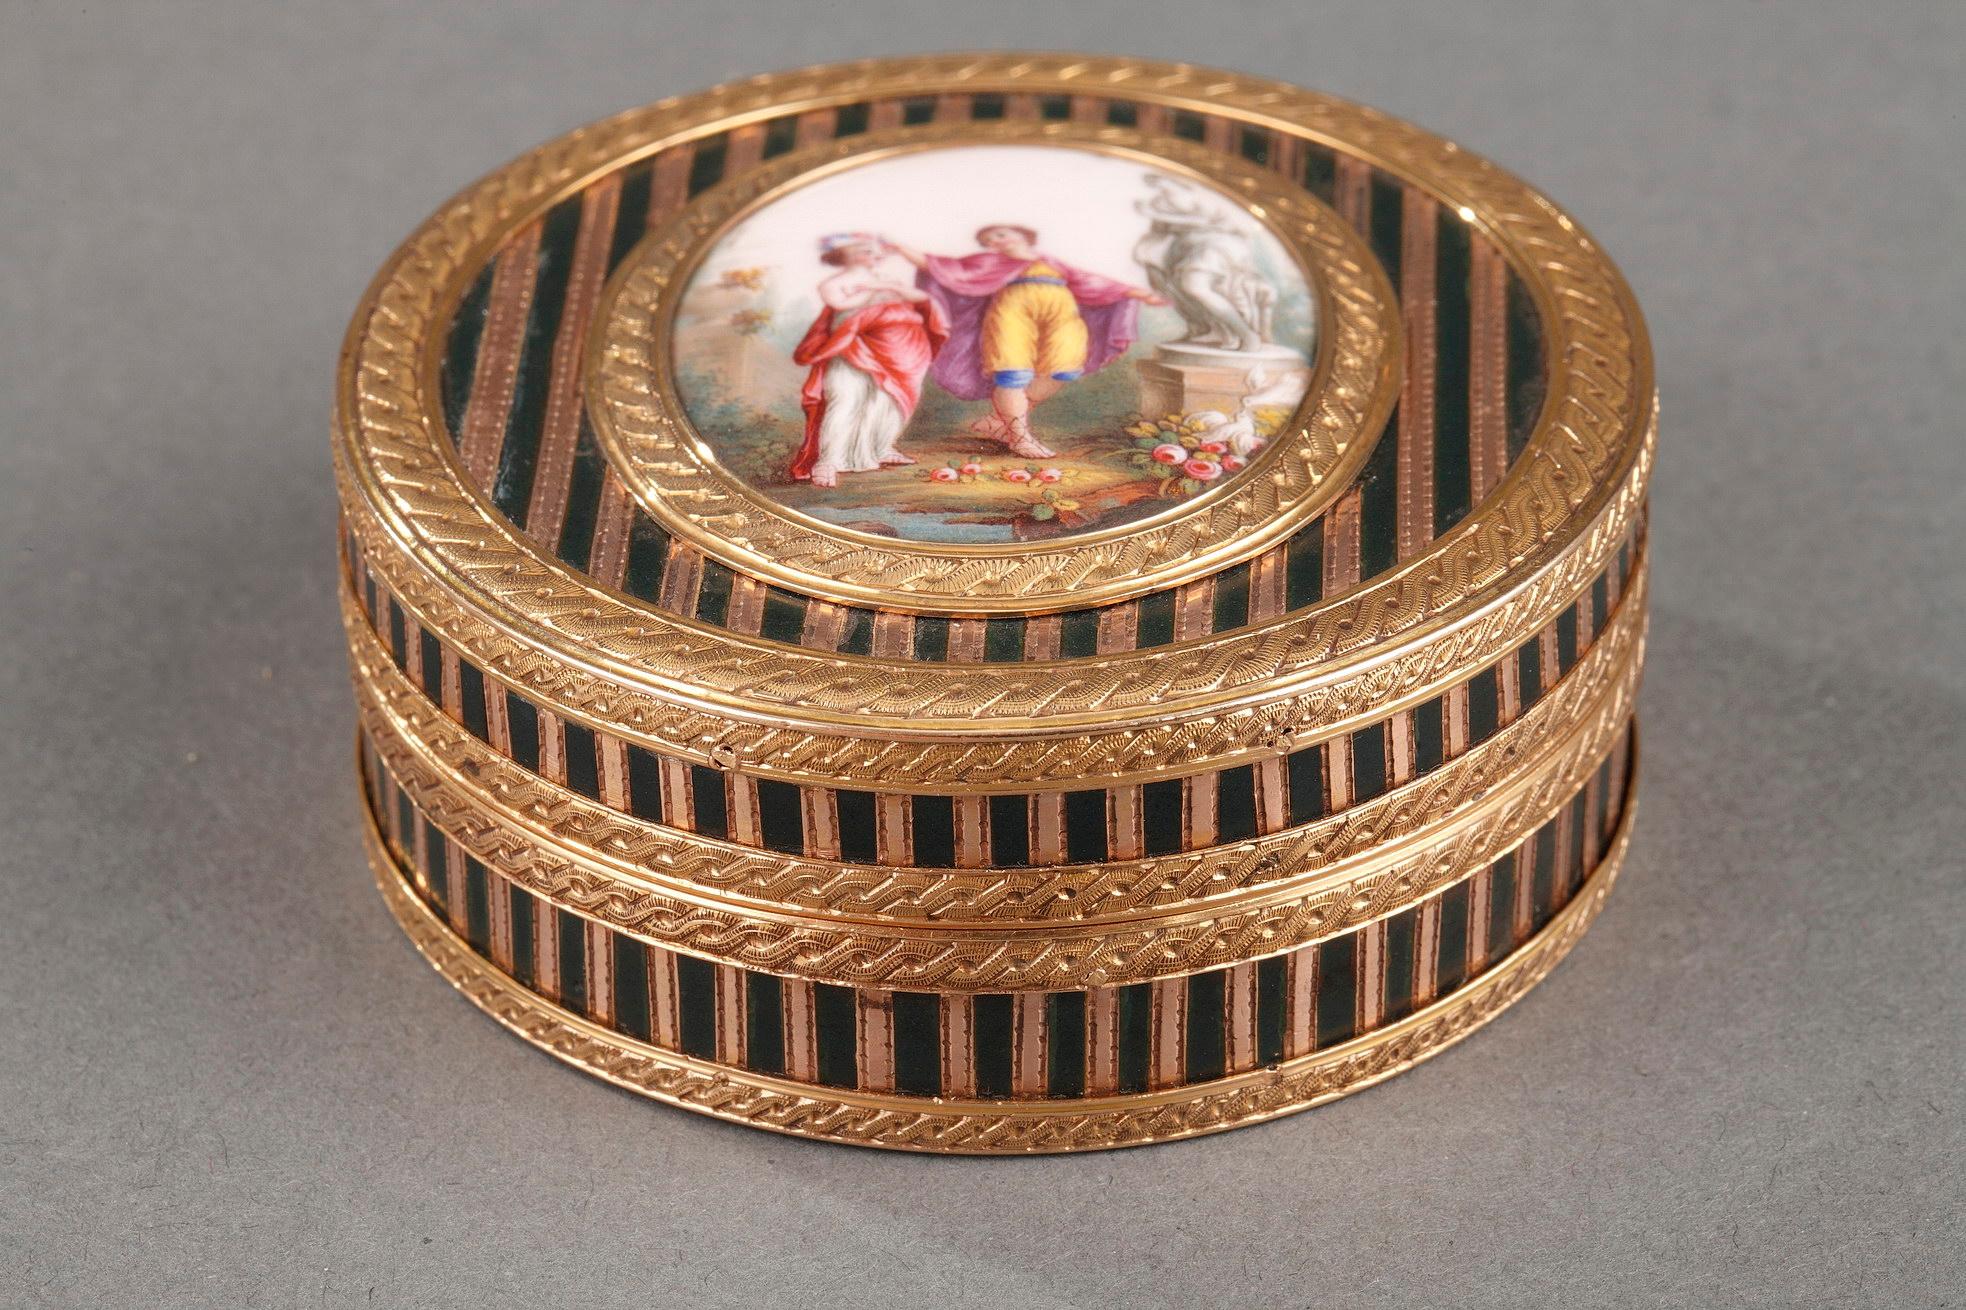 enamel or lacquer